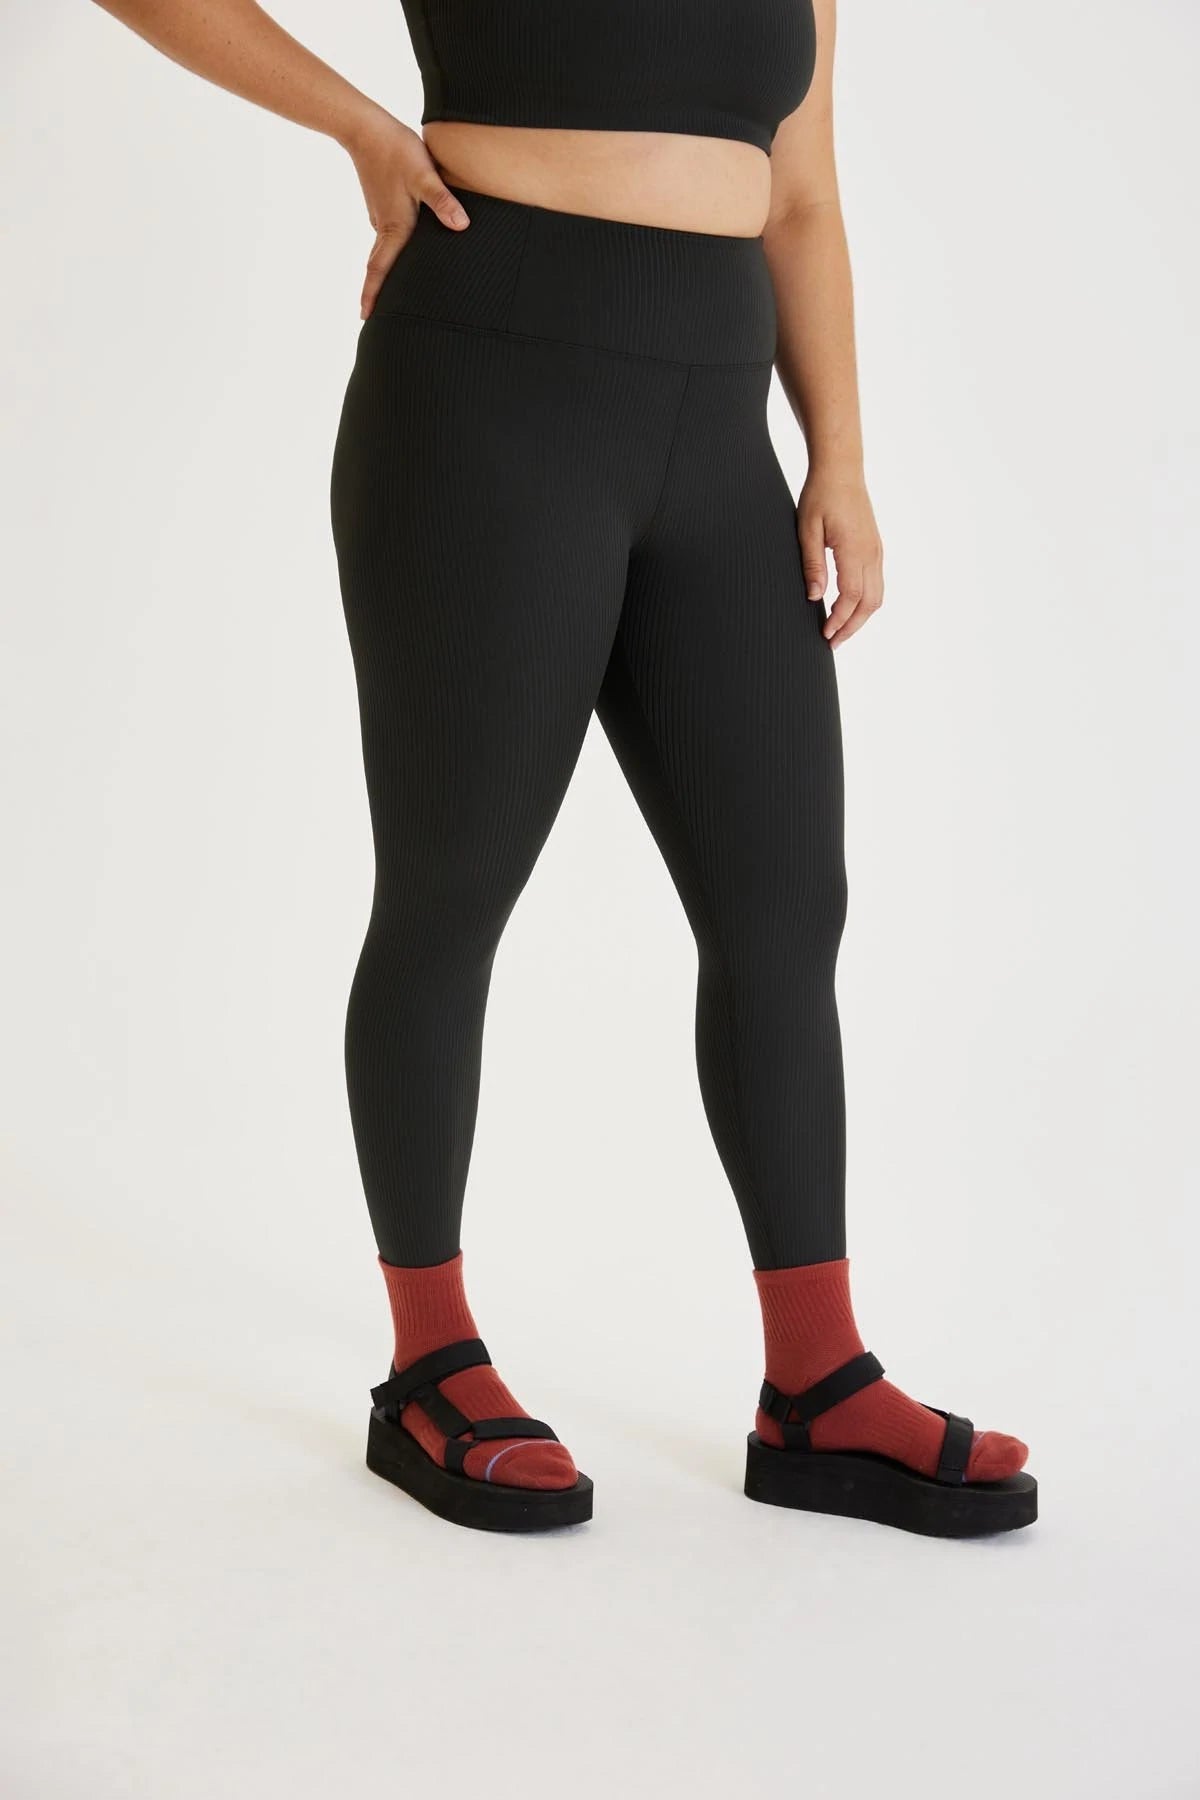 Girlfriend Collective - RIB High-Rise Leggings - Made from recycled bottles - Weekendbee - sustainable sportswear